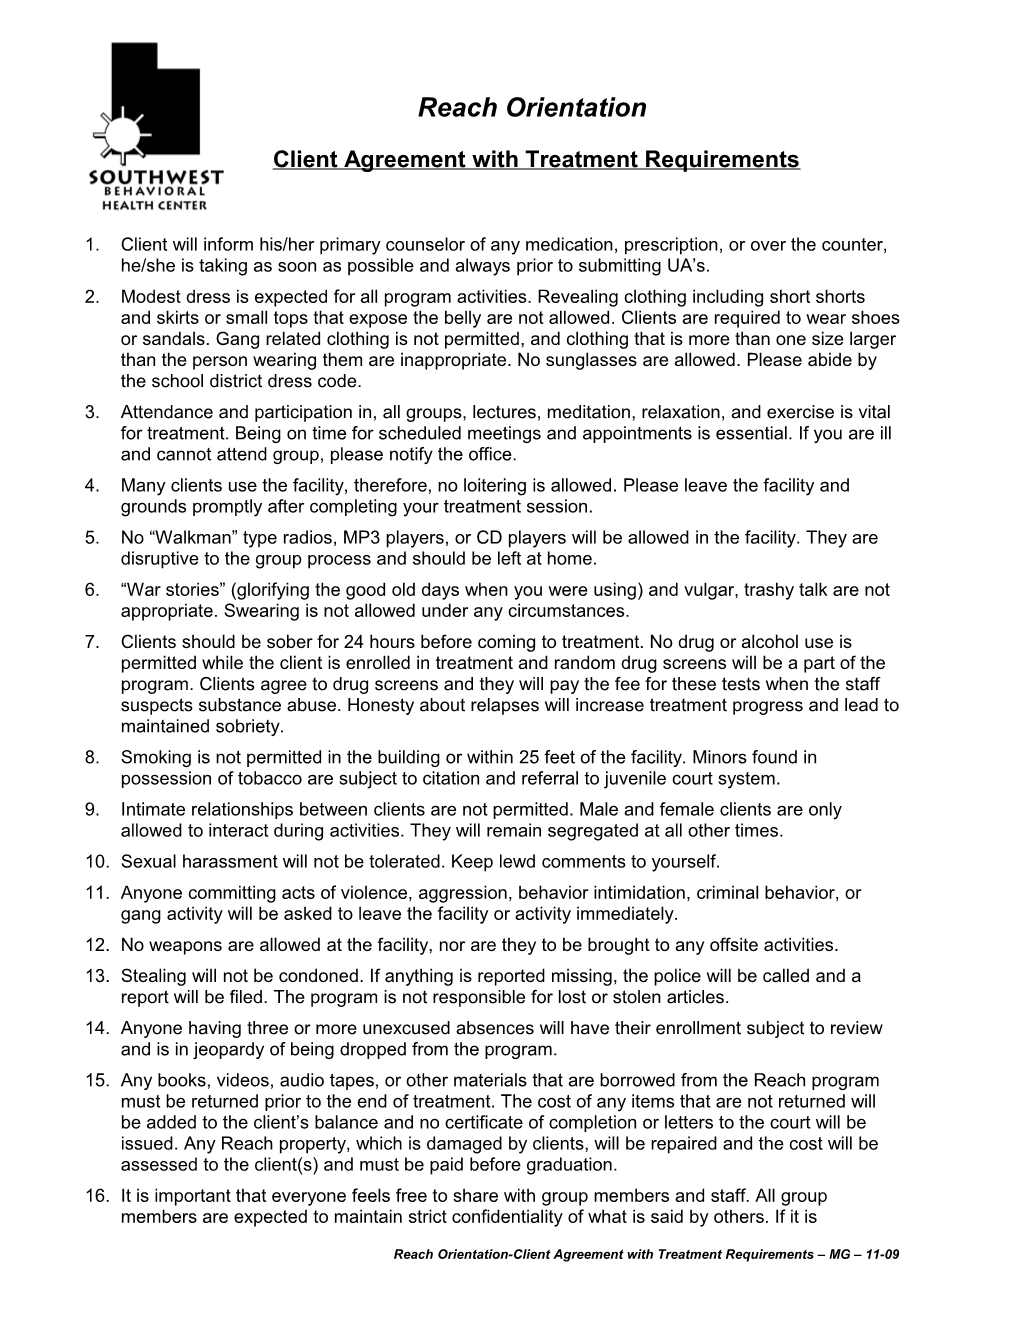 Client Agreement with Treatment Requirements